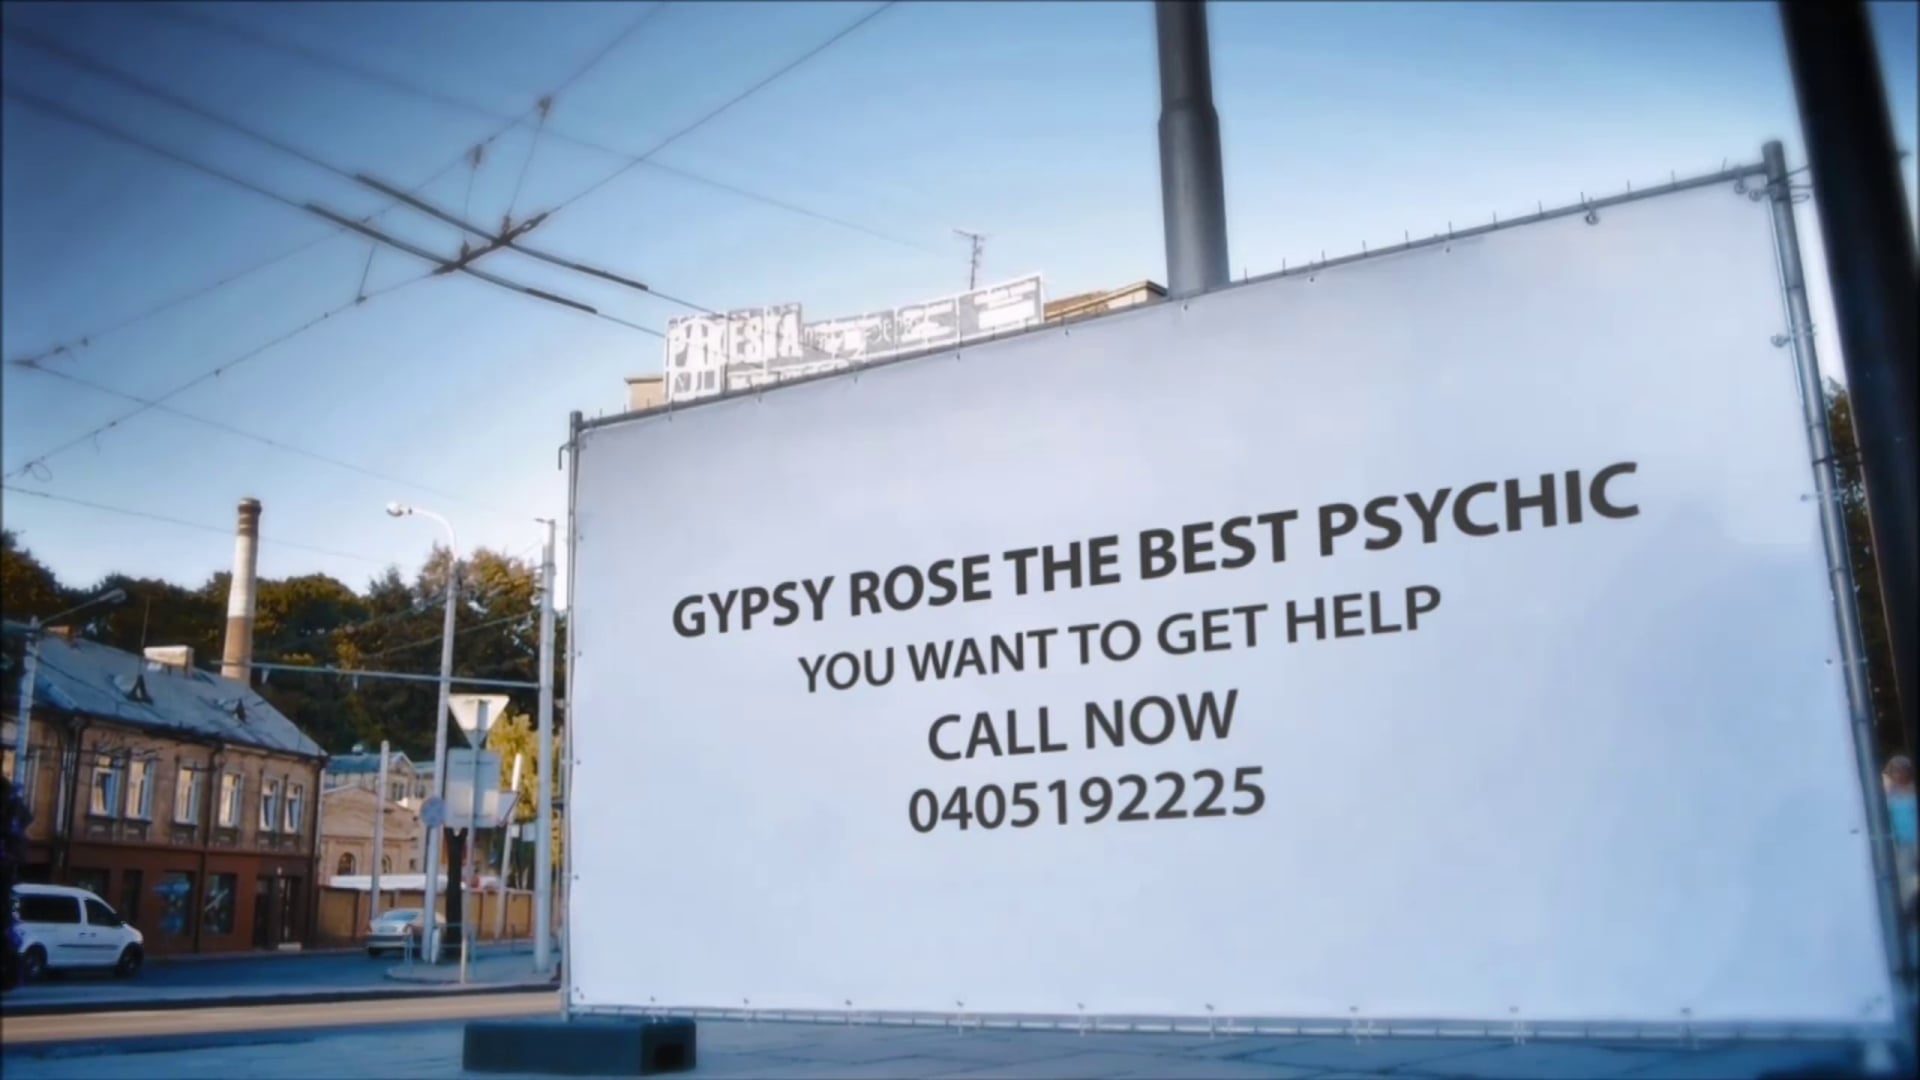 Gypsy Rose takes the high road